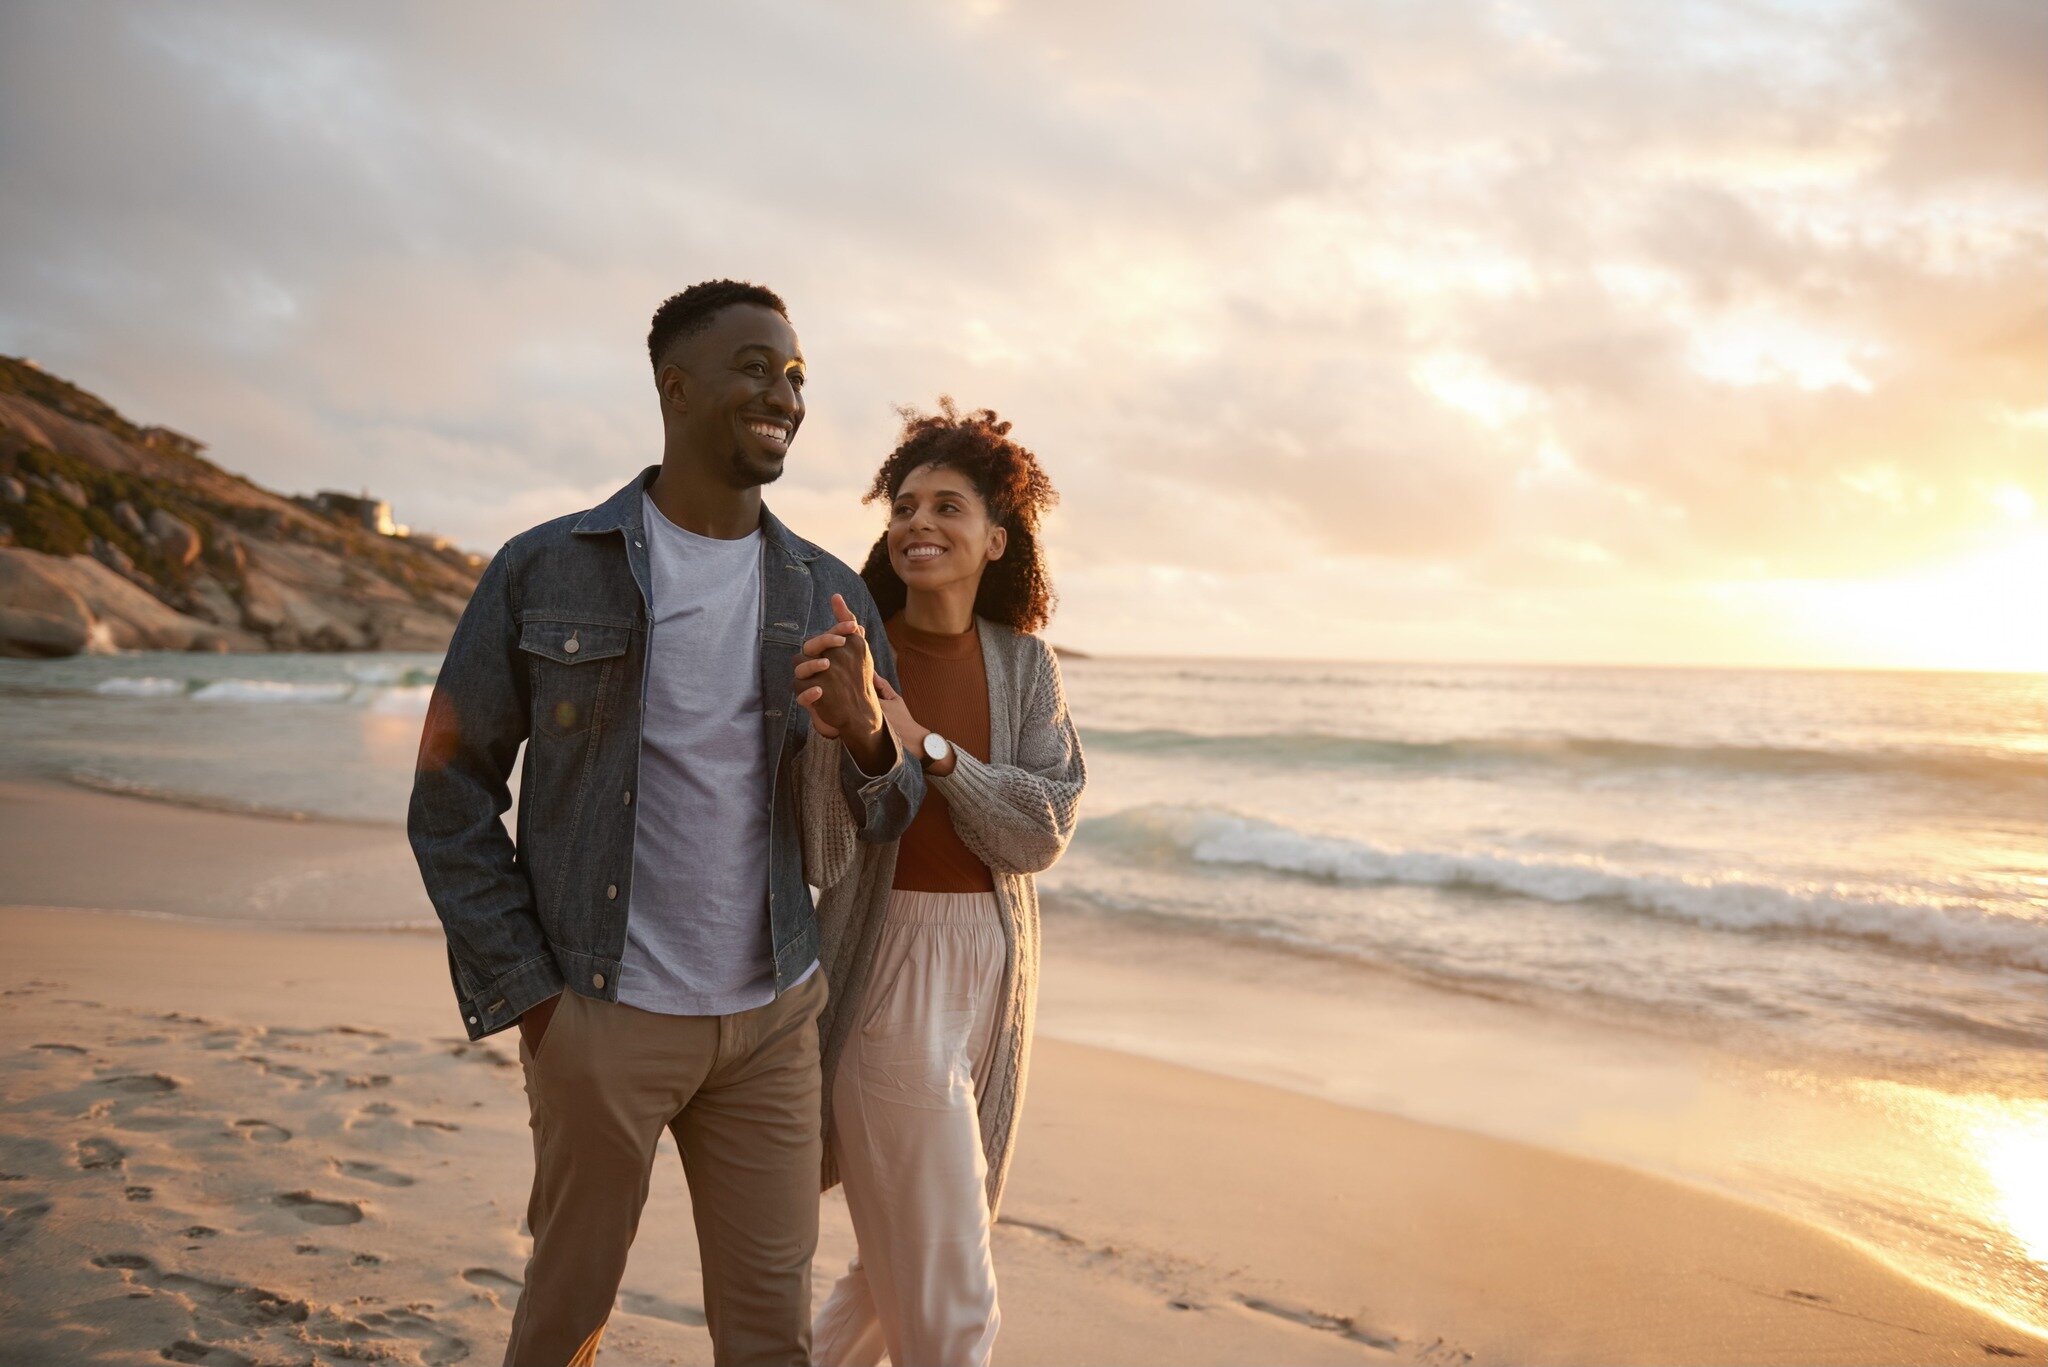 Good news for couples waiting on their Partner Visas! The Department of Home Affairs has recently announced a reduction in processing times for Subclass 820/801 visas. Stay united with your loved ones sooner! 

Feel free to reach out for your Partner